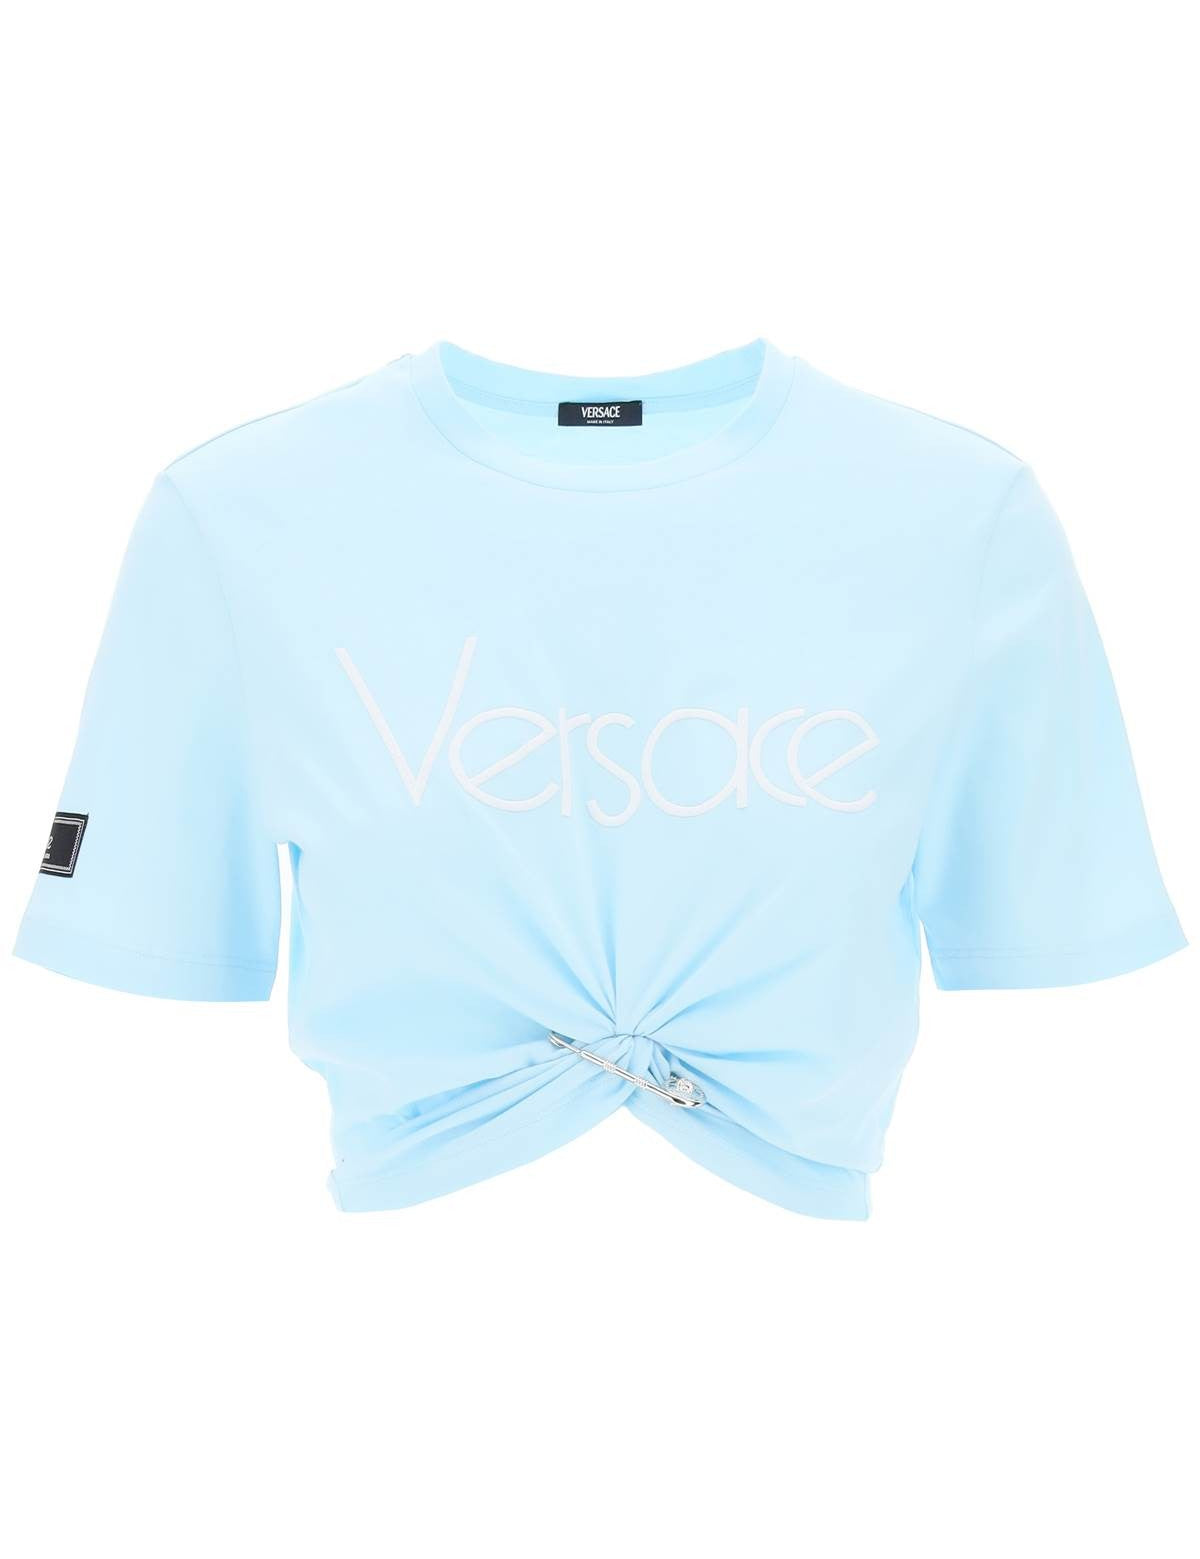 versace-t-shirt-cropped-1978-re-edition.jpg